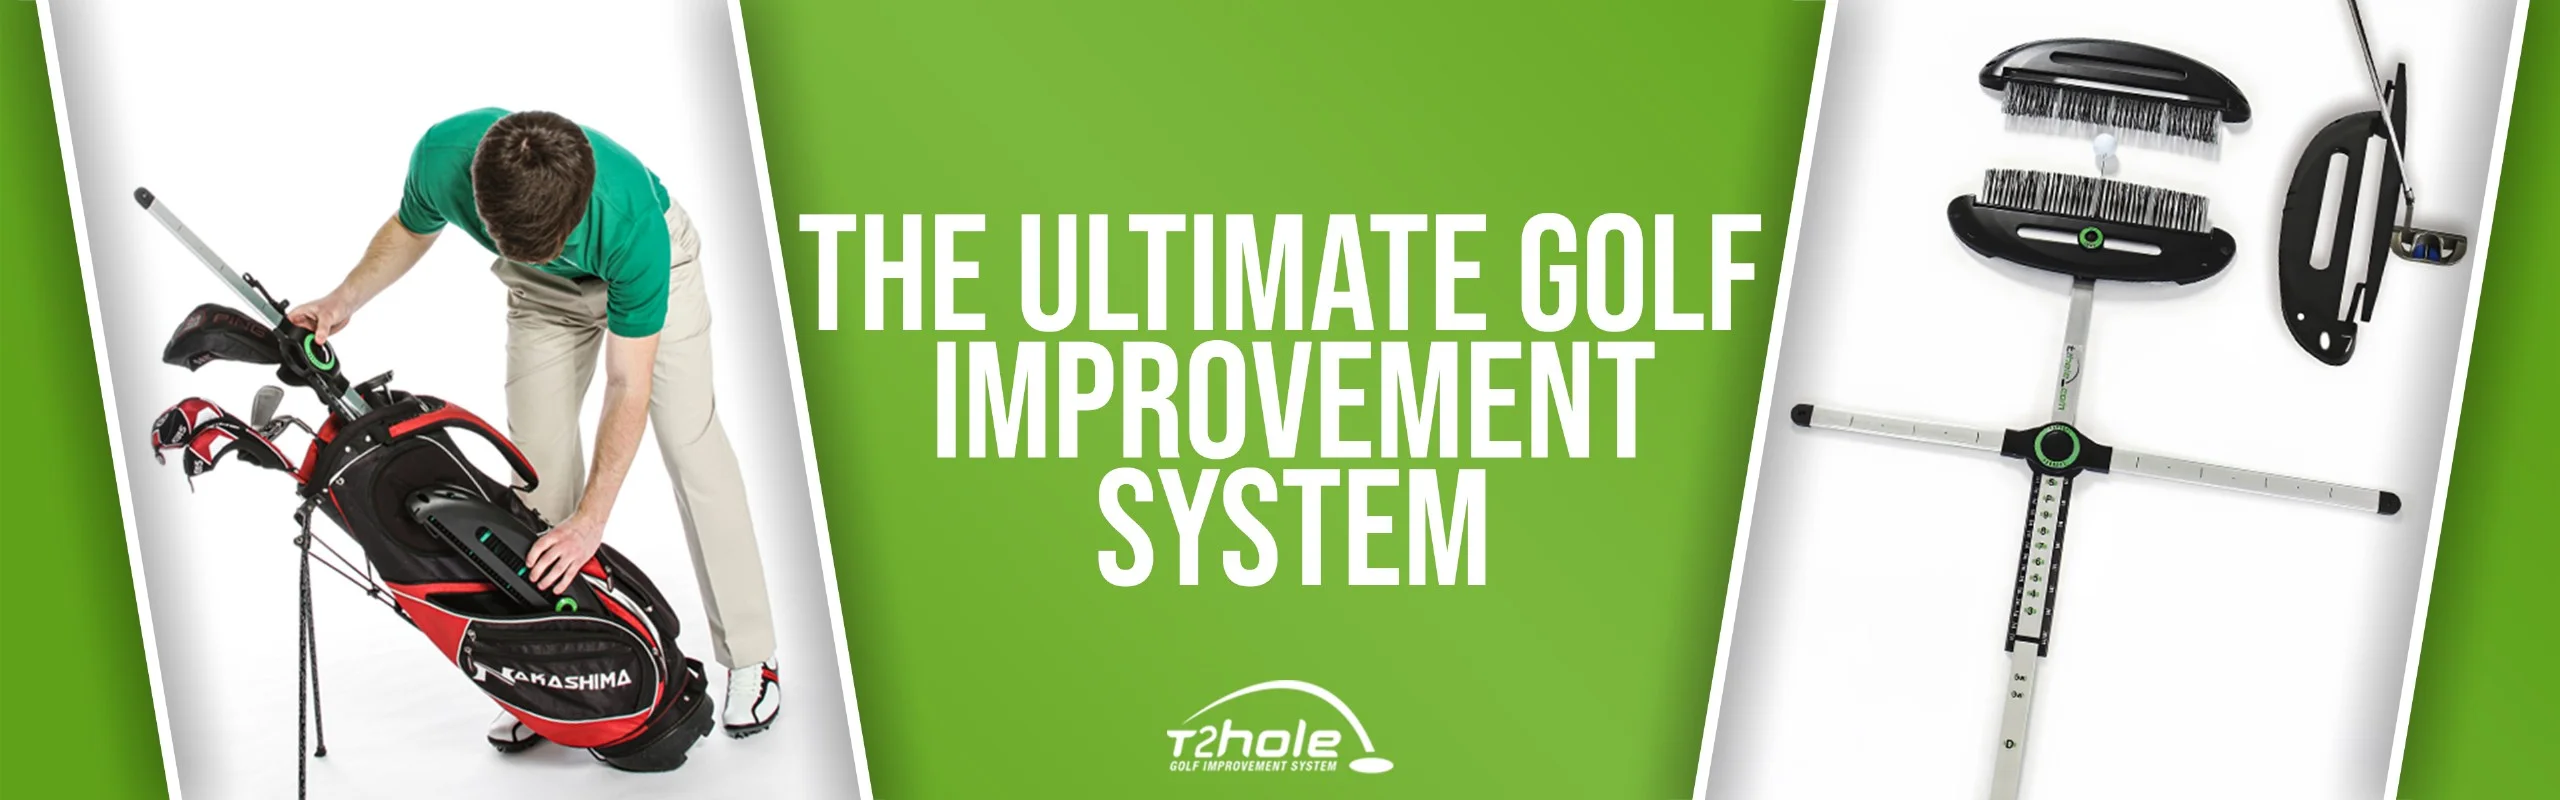 The one and only golf improvement system you'll ever need by T2Hole